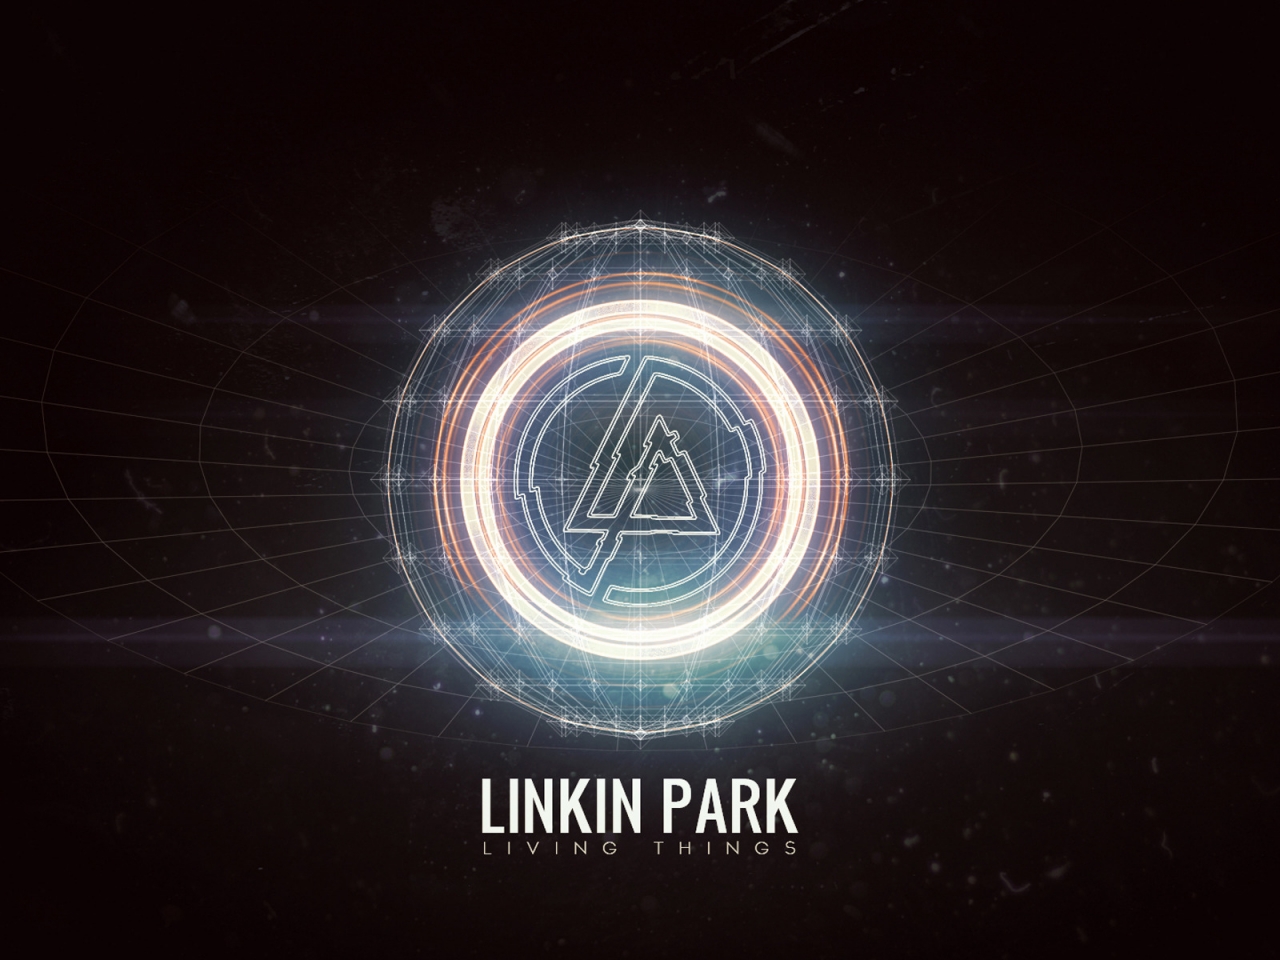 Linkin Park Living Things for 1280 x 960 resolution